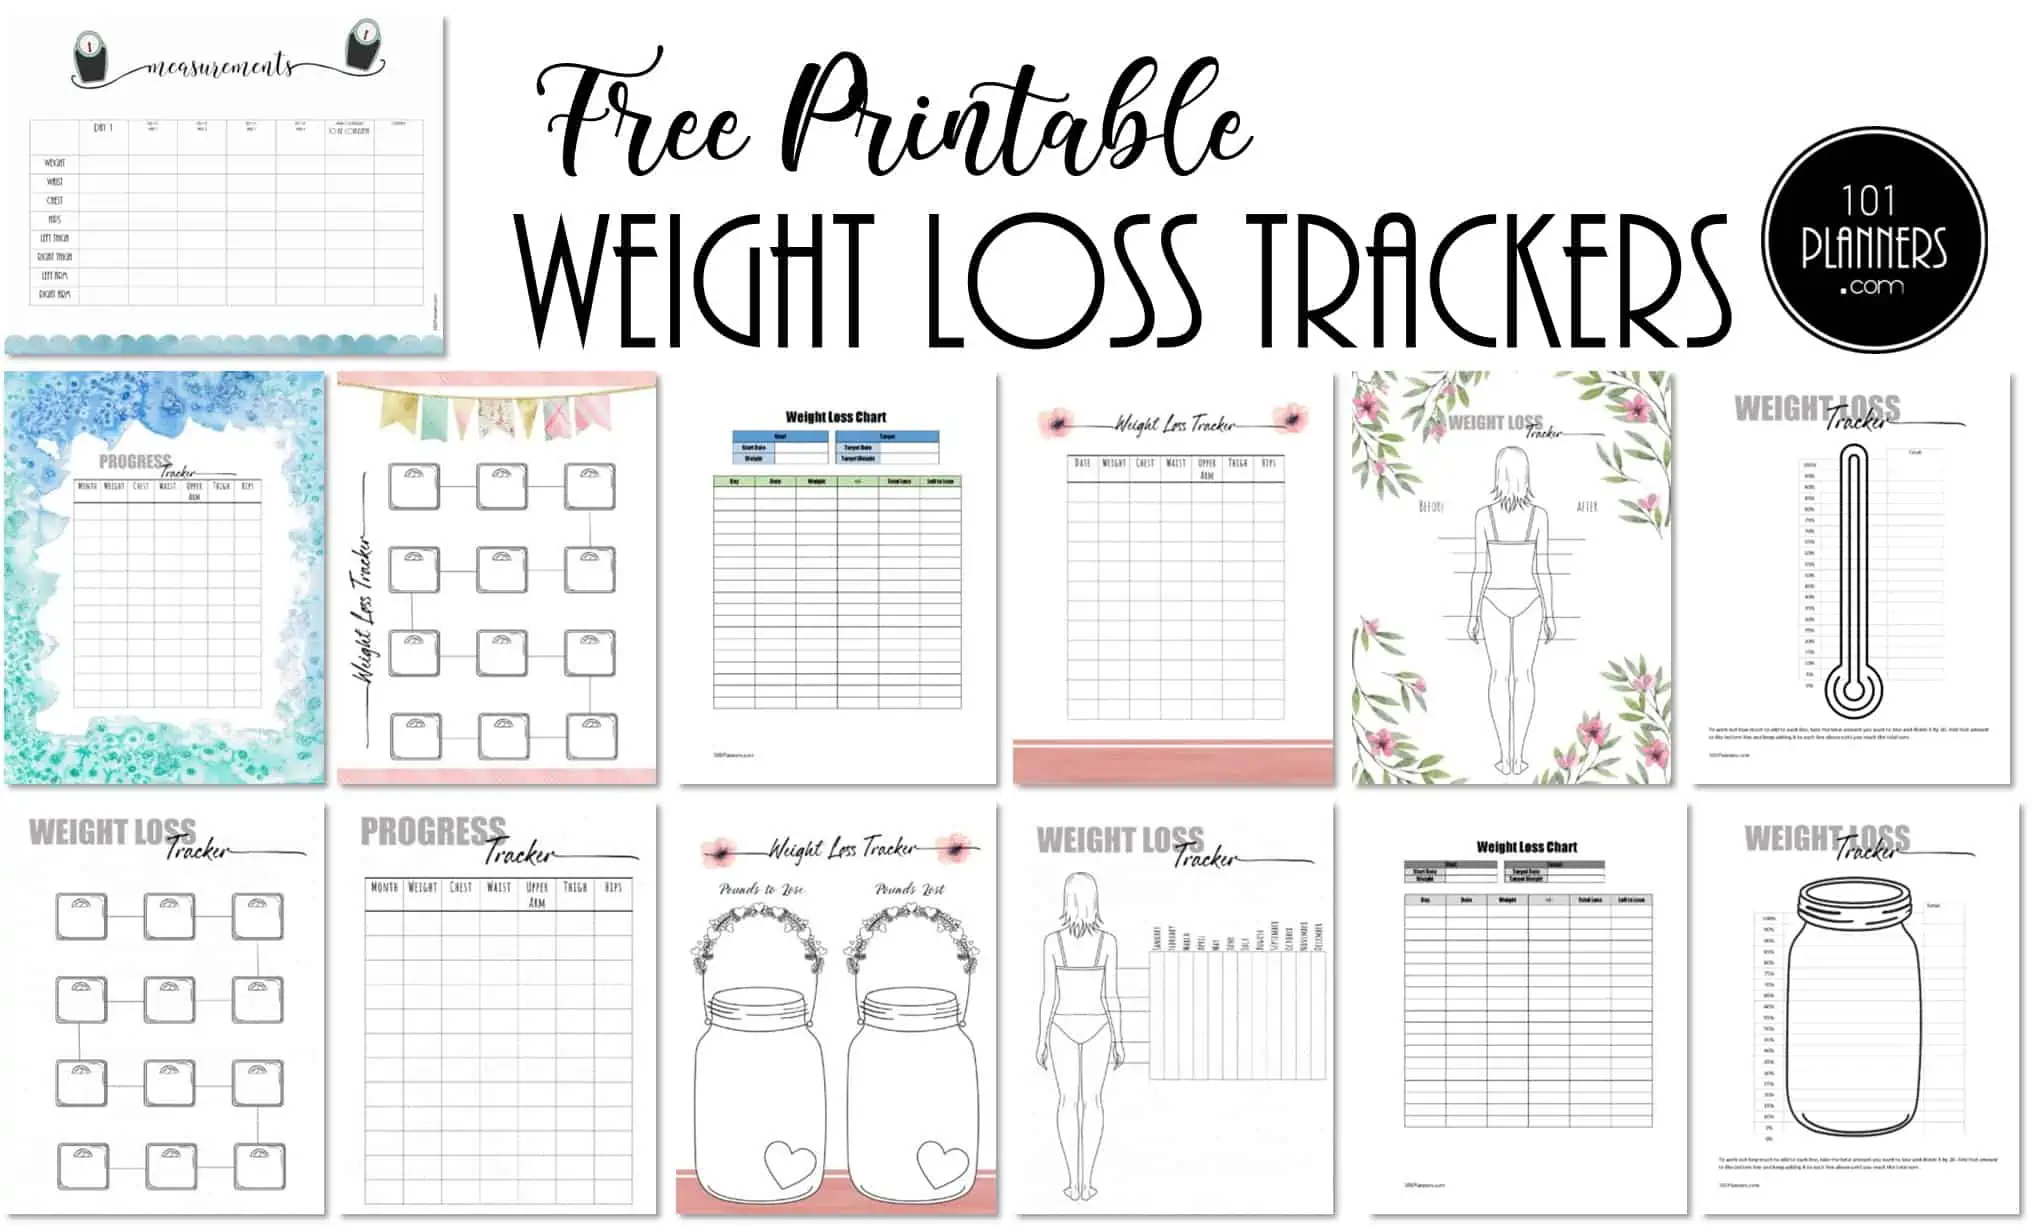 Ideal Body Weight Calculator: Find Your healthy Target Weight